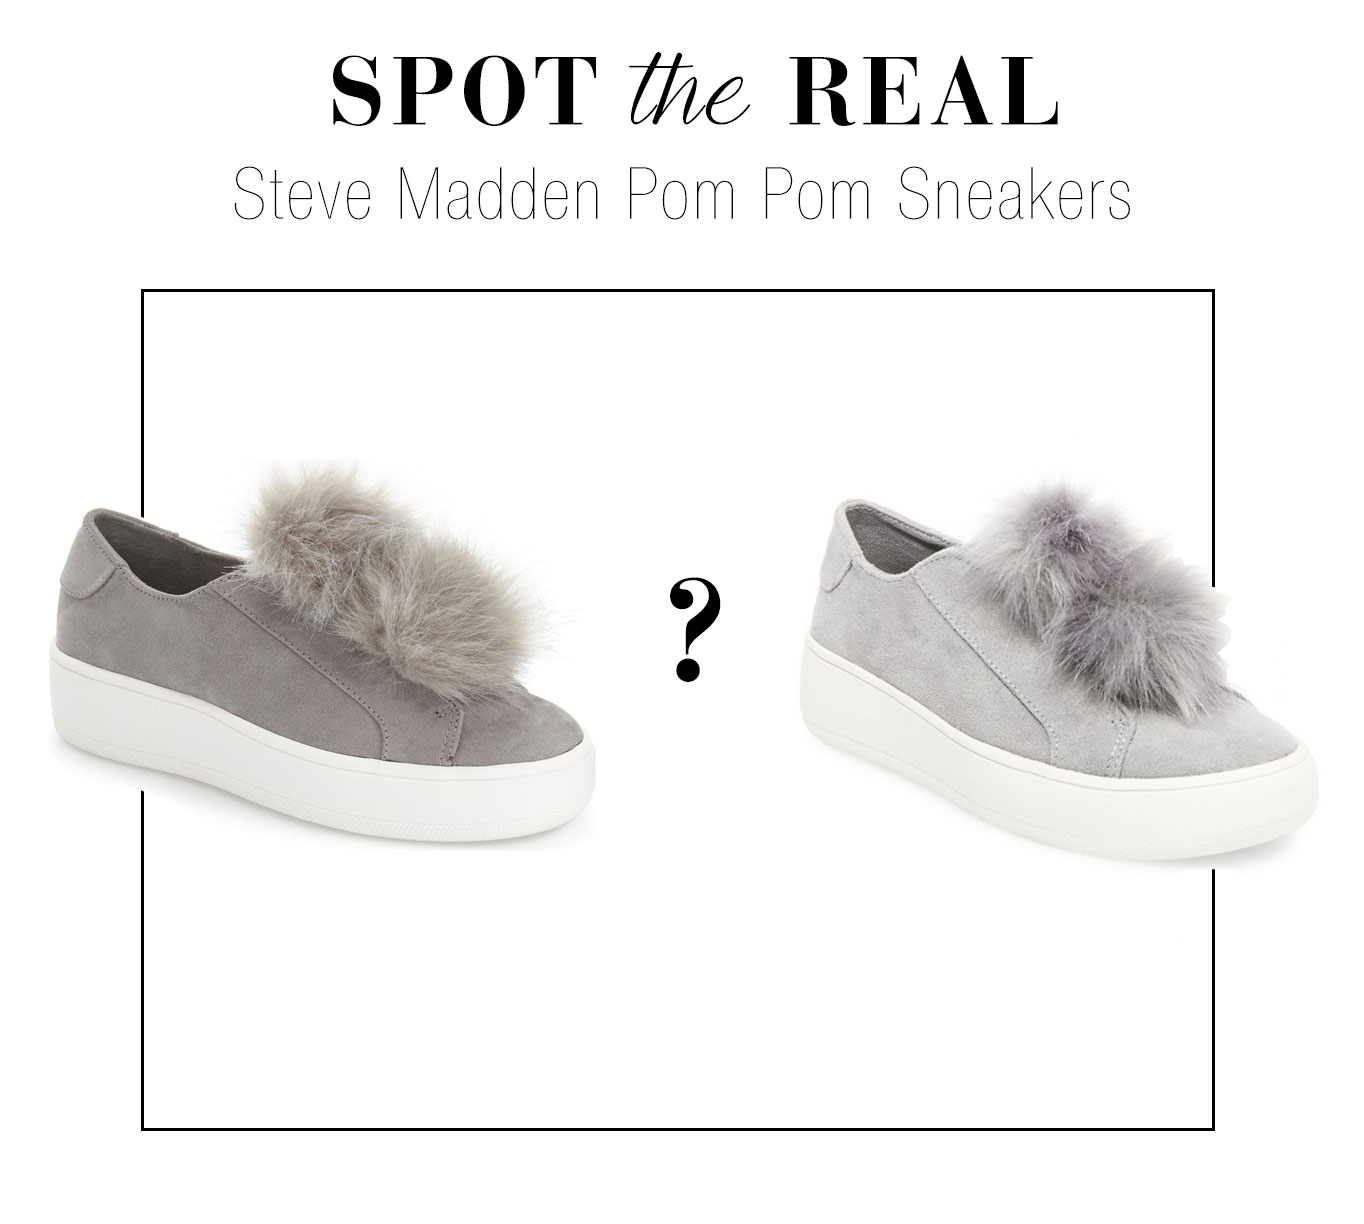 Can you guess which are the real Steve Madden pom pom sneakers?